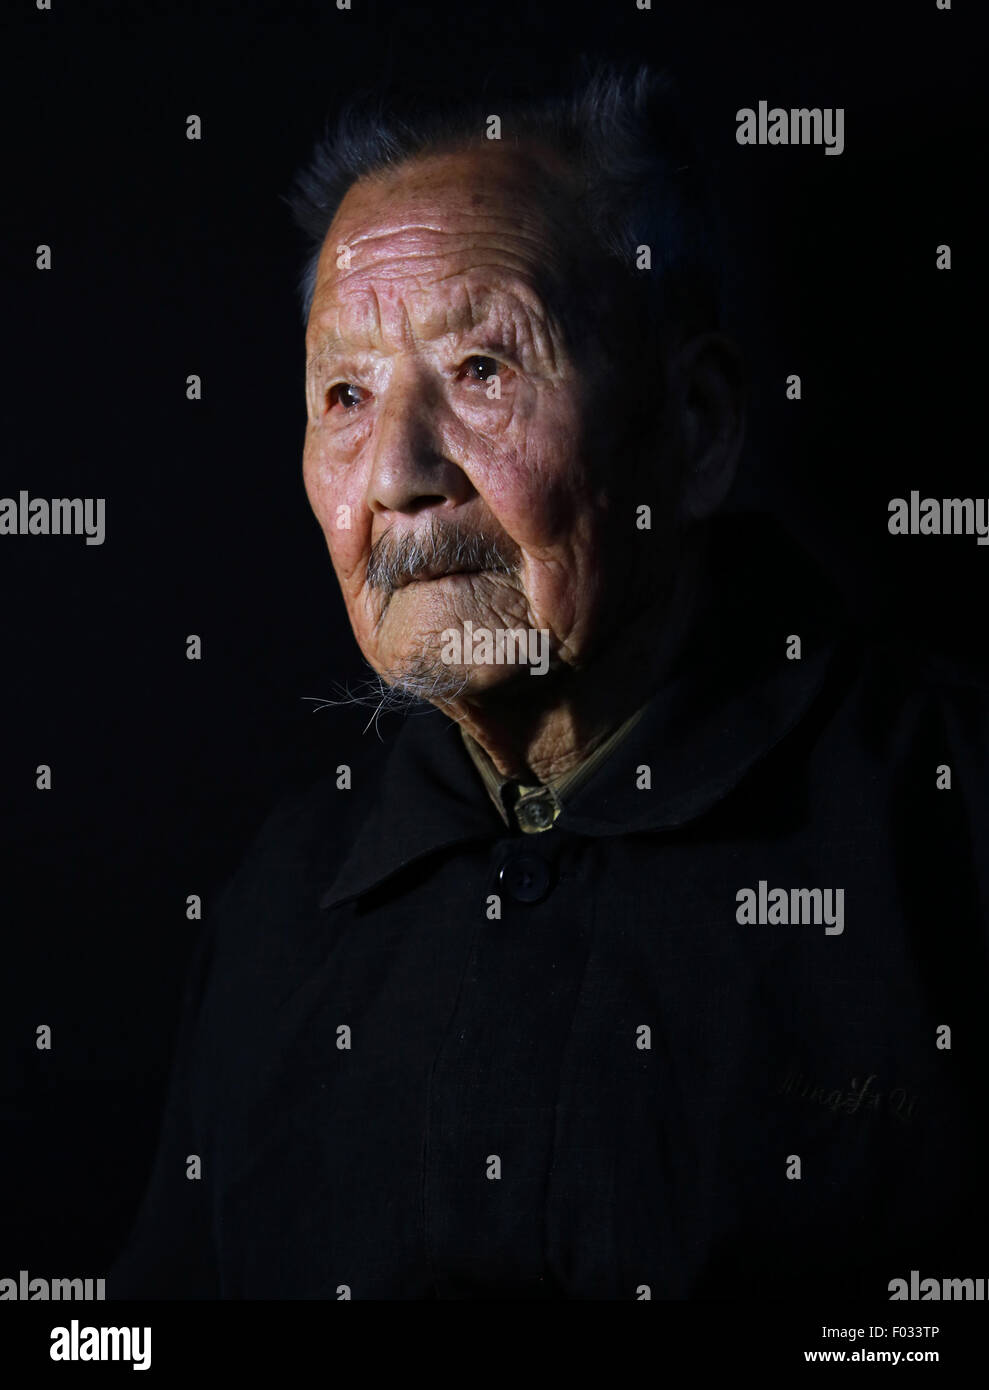 Chn. 28th Mar, 2015. CHINA - March 28 2015: (EDITORIAL USE ONLY. CHINA OUT)(MINIMUM PRICE: 100 USD) Song Maotian: Male, born in 1917, now lives in Huangye Hebei.Song studied martial art when he was young, and became Zhang Zhijiang, the Army General's close guard, attending Taierzhuang Battle and Kunlunguan Battle.Song passed the exams for 16th term 6th school Huangpu Military Academy. He was staff officer of 94th Corp, vice Battalion commander of Delivery Battalion 43th Division and Company commander for 3rd Company. It's been 70 years since the Second World War ended and Japan surrender Stock Photo